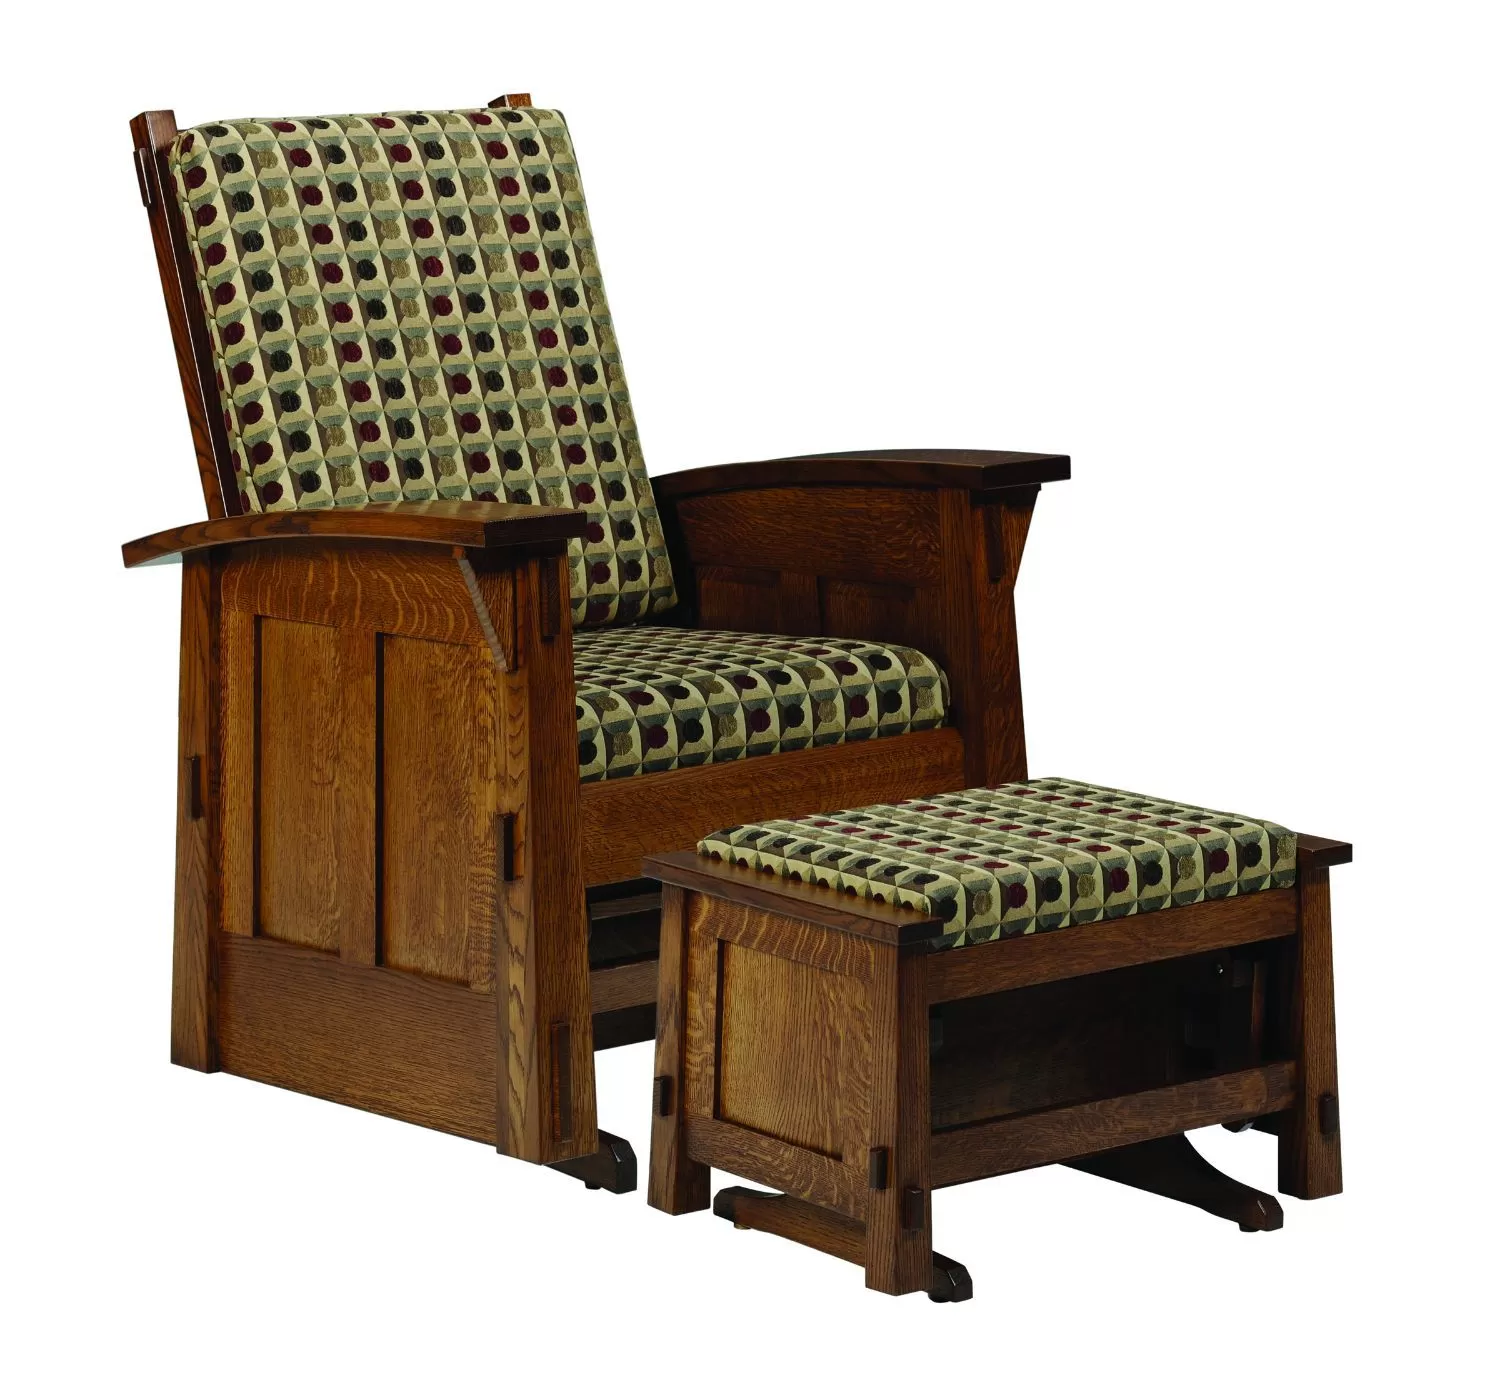 Olde Shaker Glider with Ottoman